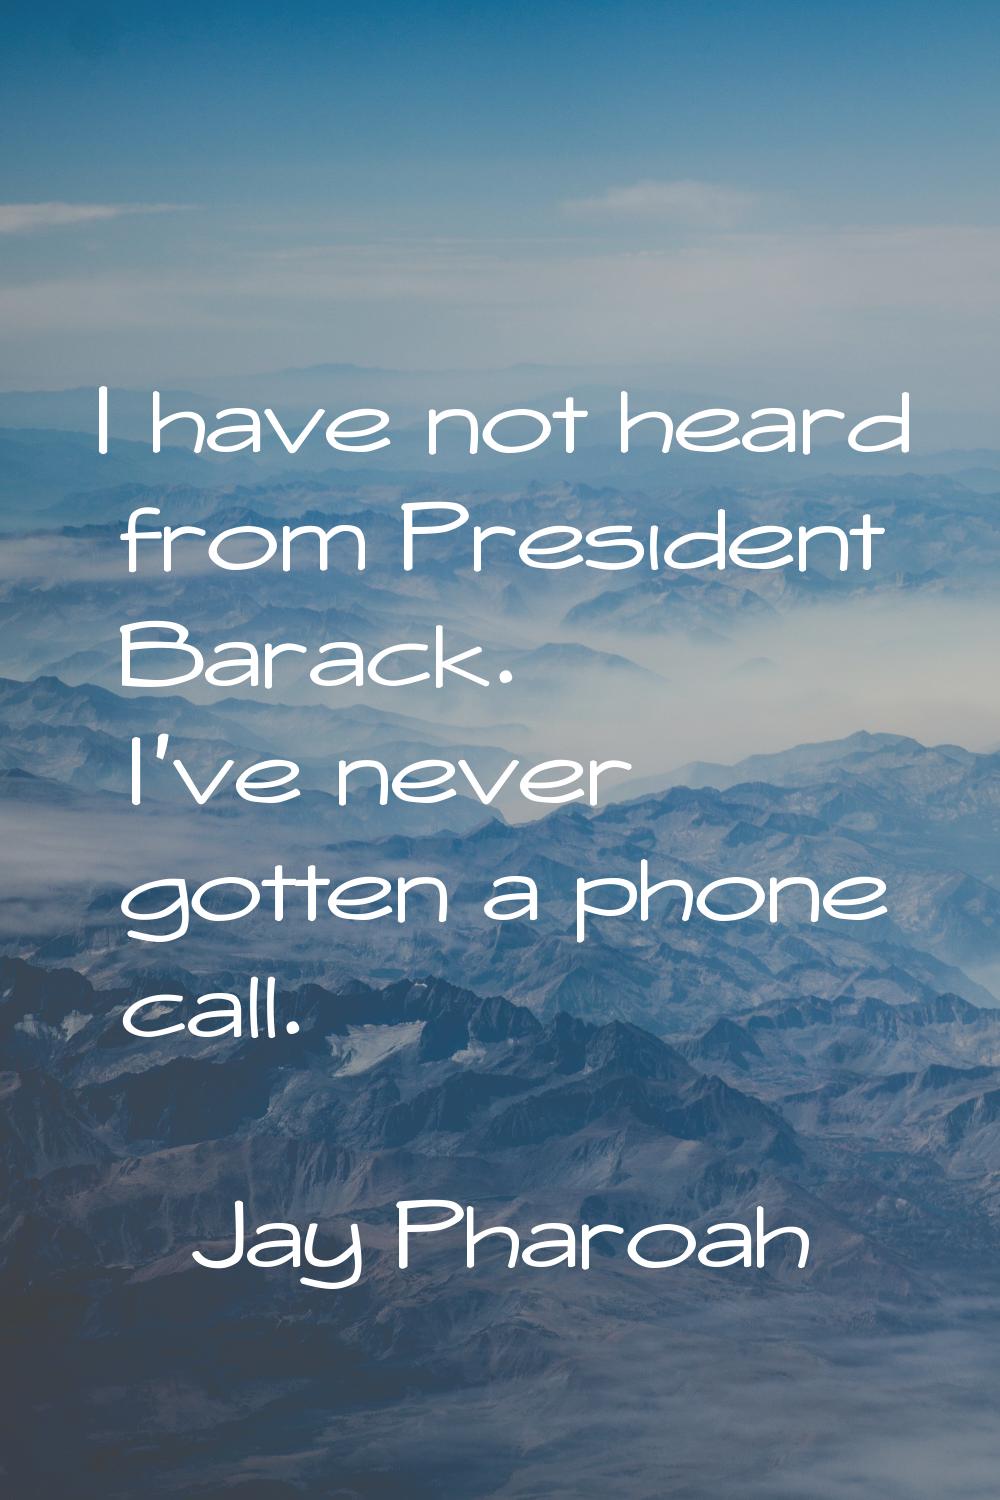 I have not heard from President Barack. I've never gotten a phone call.